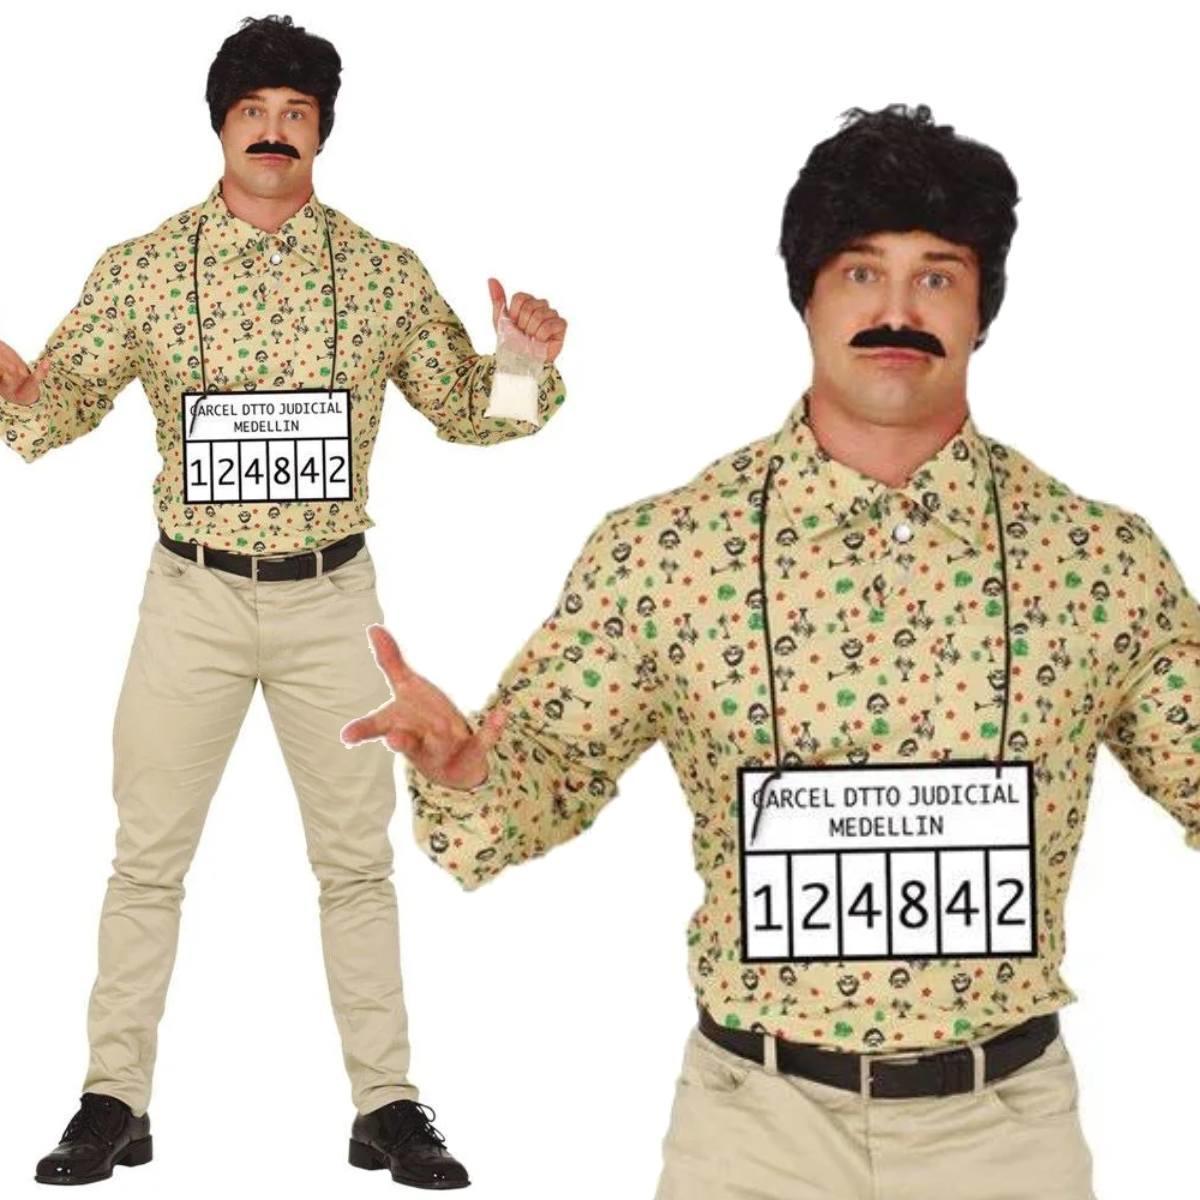 Men's Colombian Gangster Costume Pablo Escobar Fancy Dress by Guirca 86654 available here at Karnival Costumes online party shop